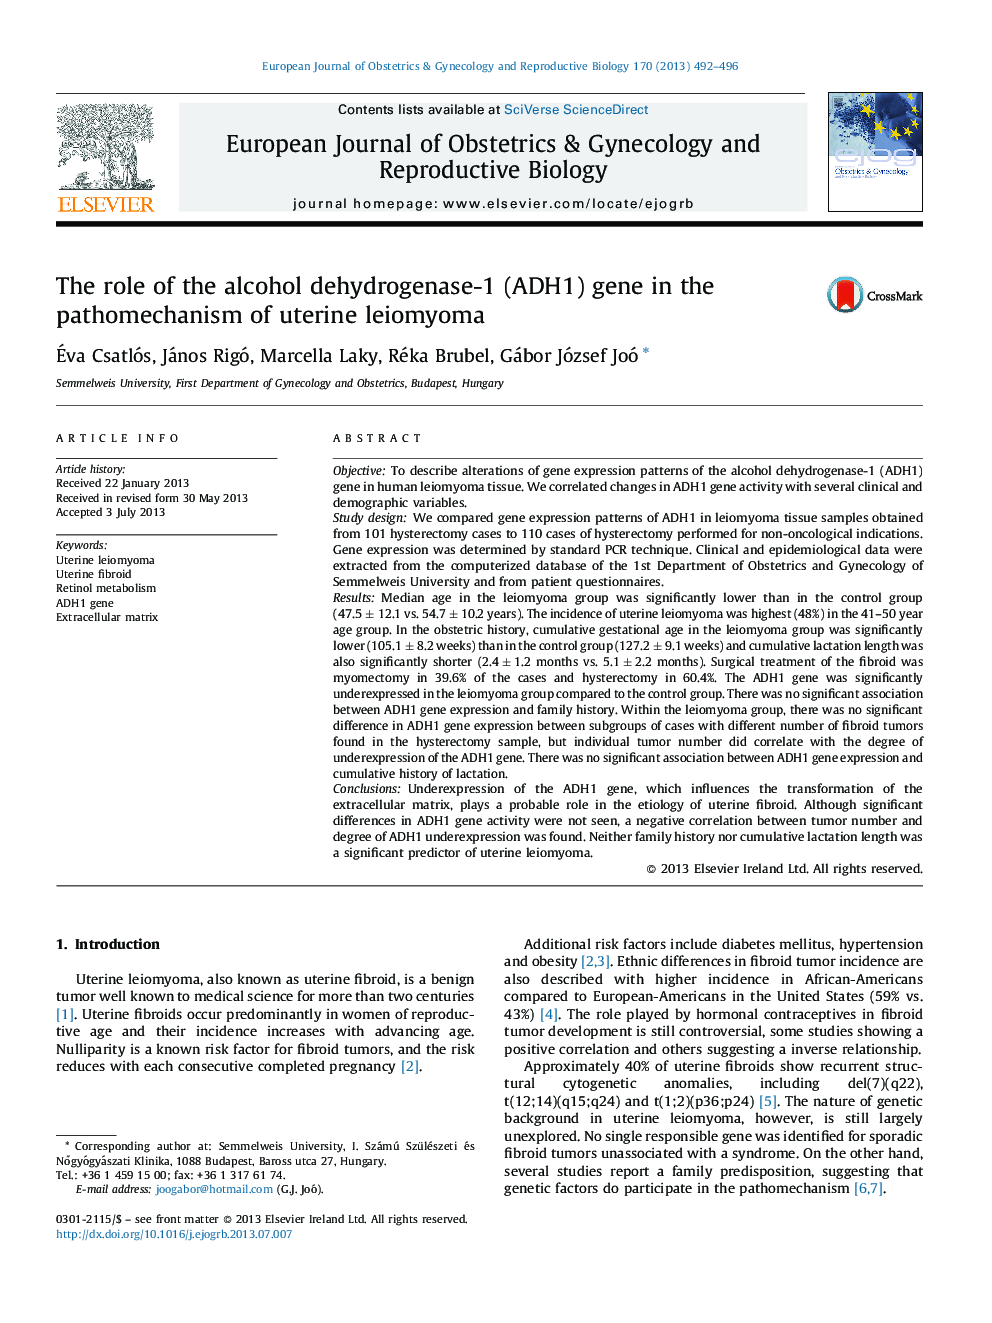 The role of the alcohol dehydrogenase-1 (ADH1) gene in the pathomechanism of uterine leiomyoma